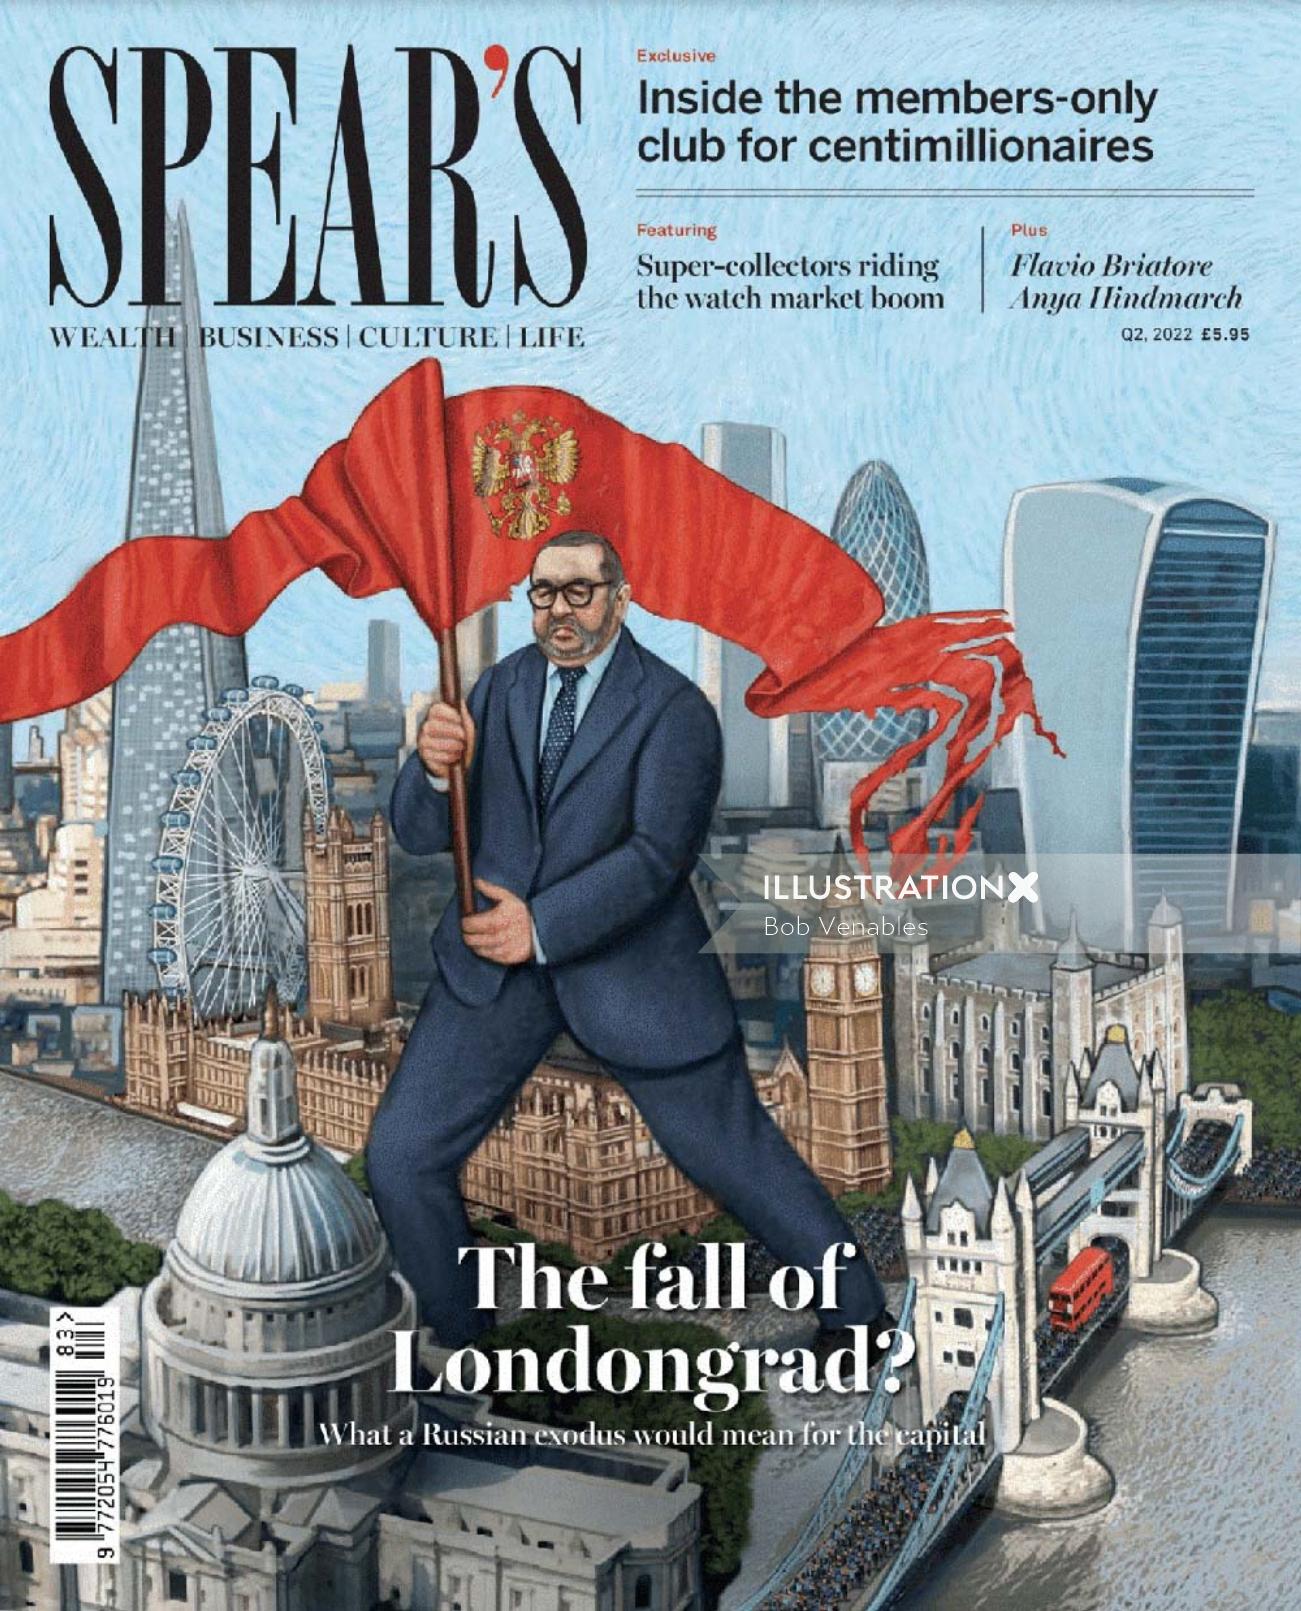 Front cover of a new edition of Spear's magazine